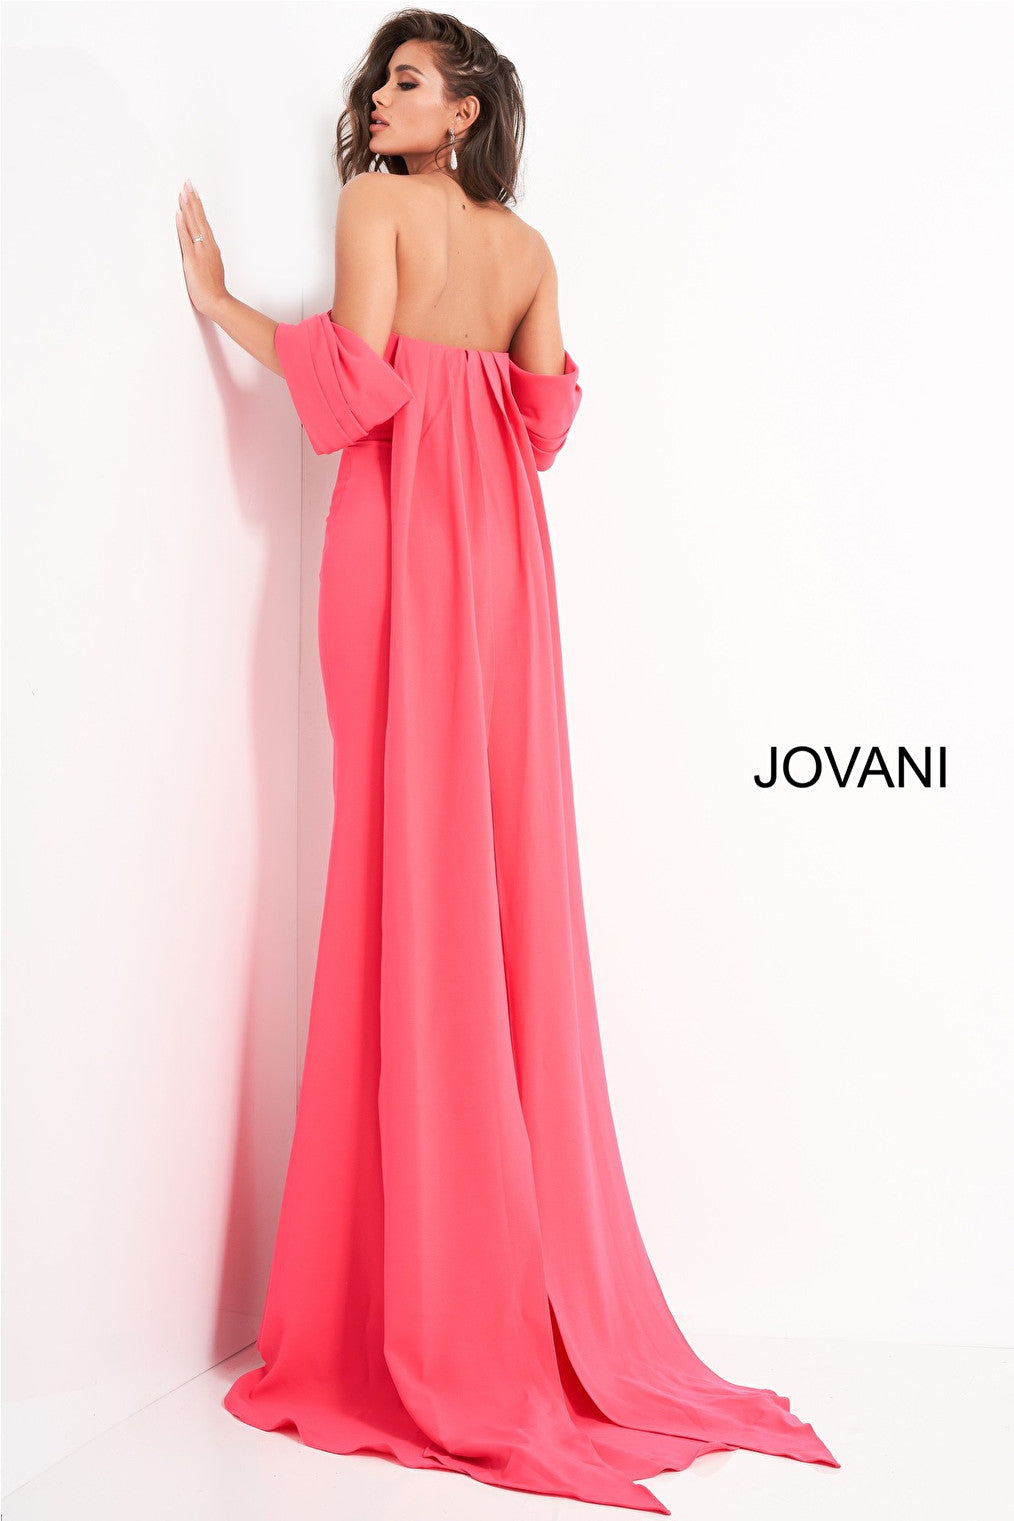 Back view lipstick Jovani evening gown 04350